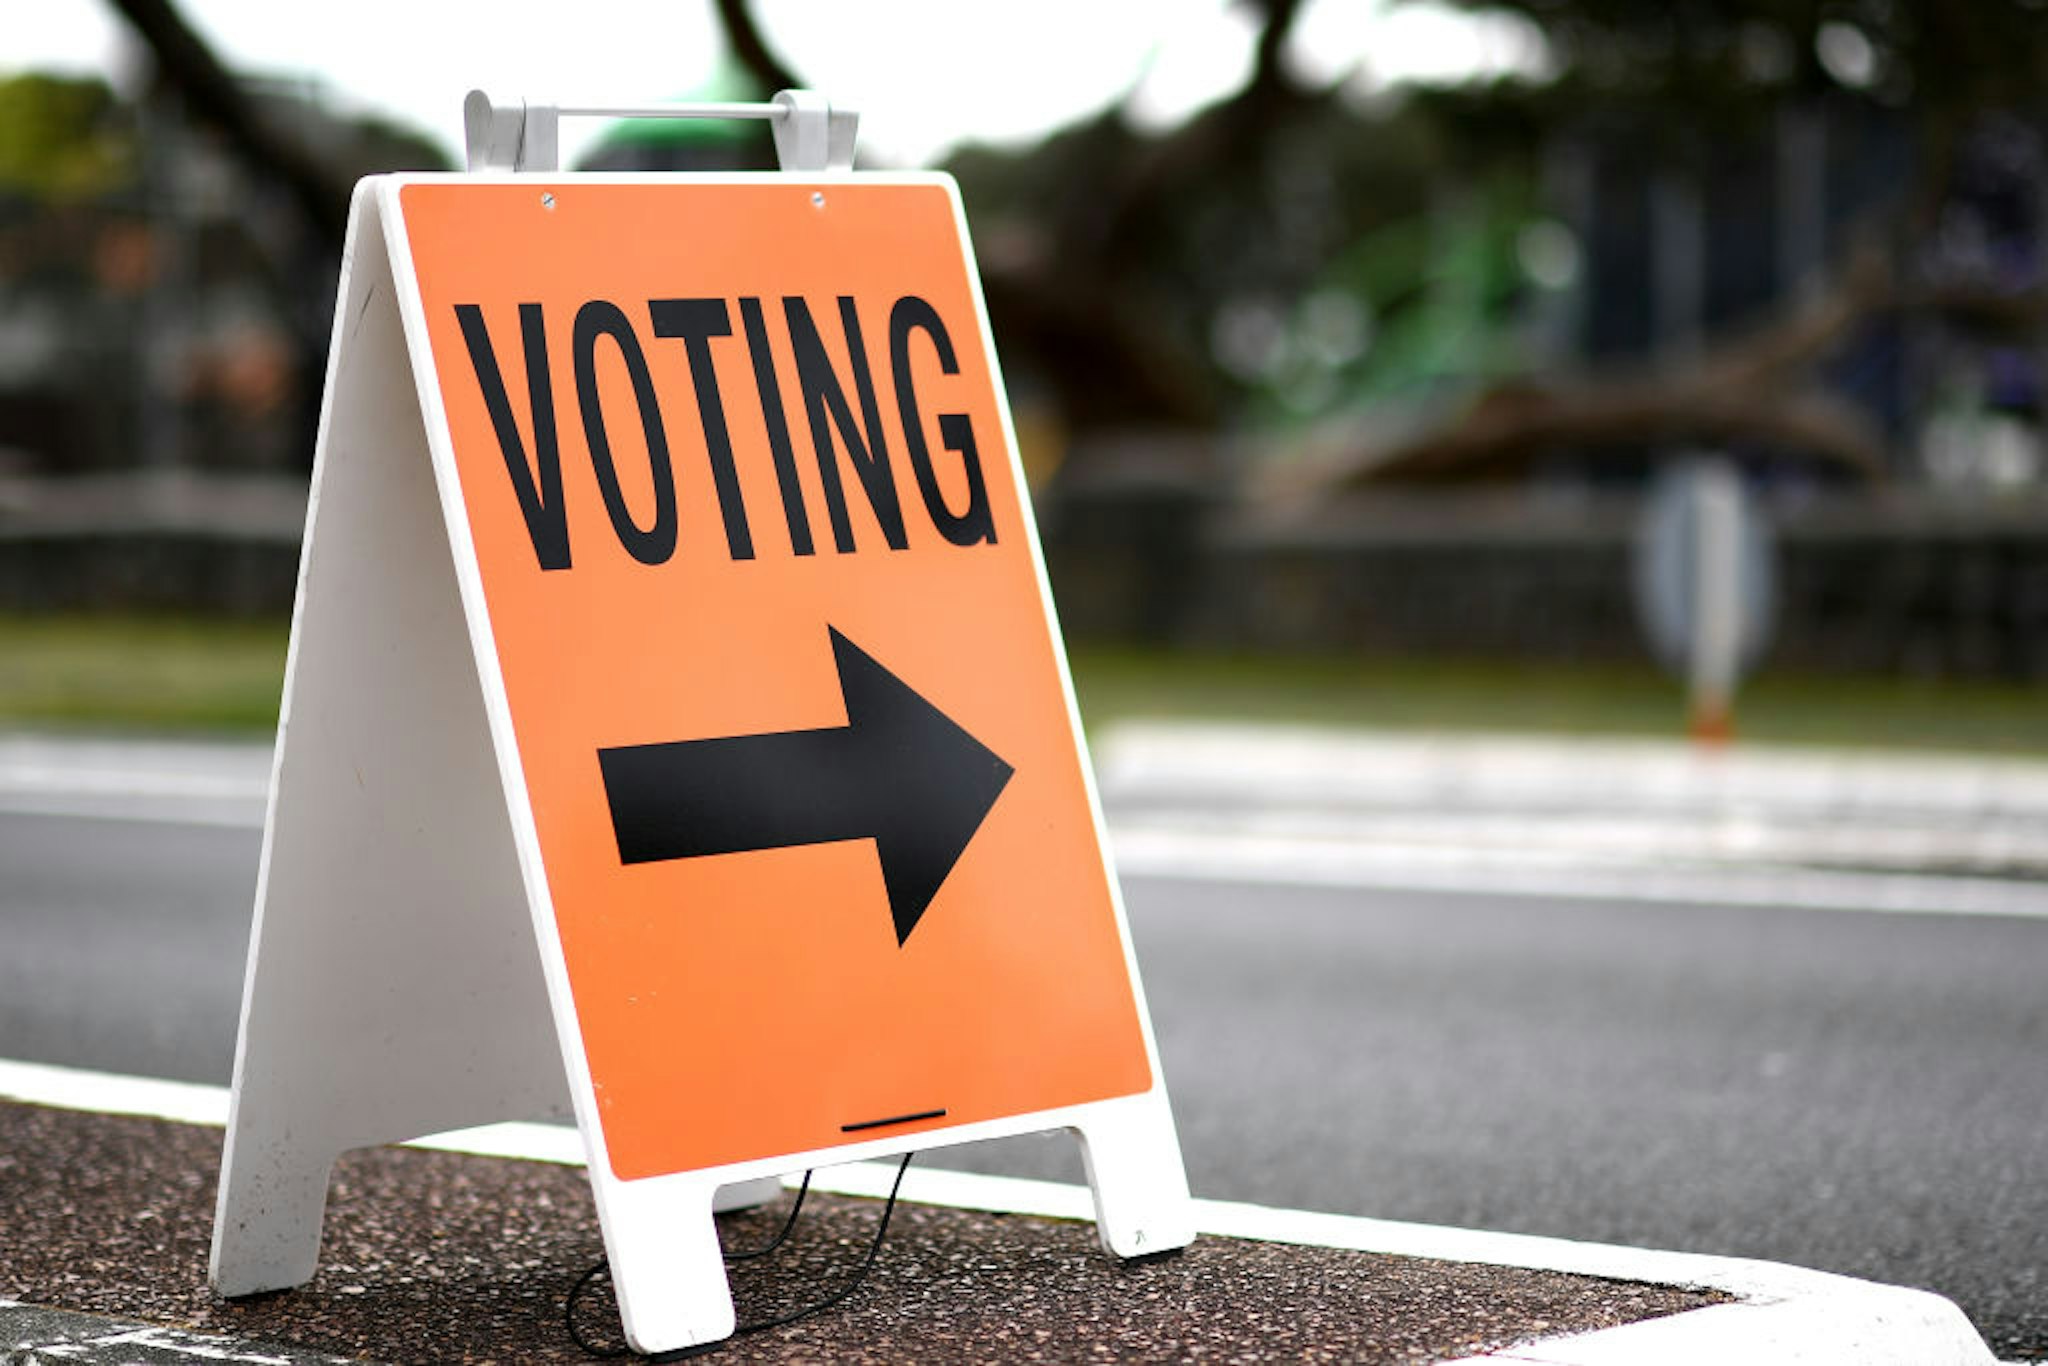 Signage for advance voting is displayed outside a polling booth on October 09, 2020 in Auckland, New Zealand. New Zealanders have been able to cast their votes in advance since October 3 ahead of the 2020 General Election. The 2020 New Zealand General Election was originally due to be held on Saturday 19 September but was delayed due to the re-emergence of COVID-19 in the community. (Photo by Hannah Peters/Getty Images)